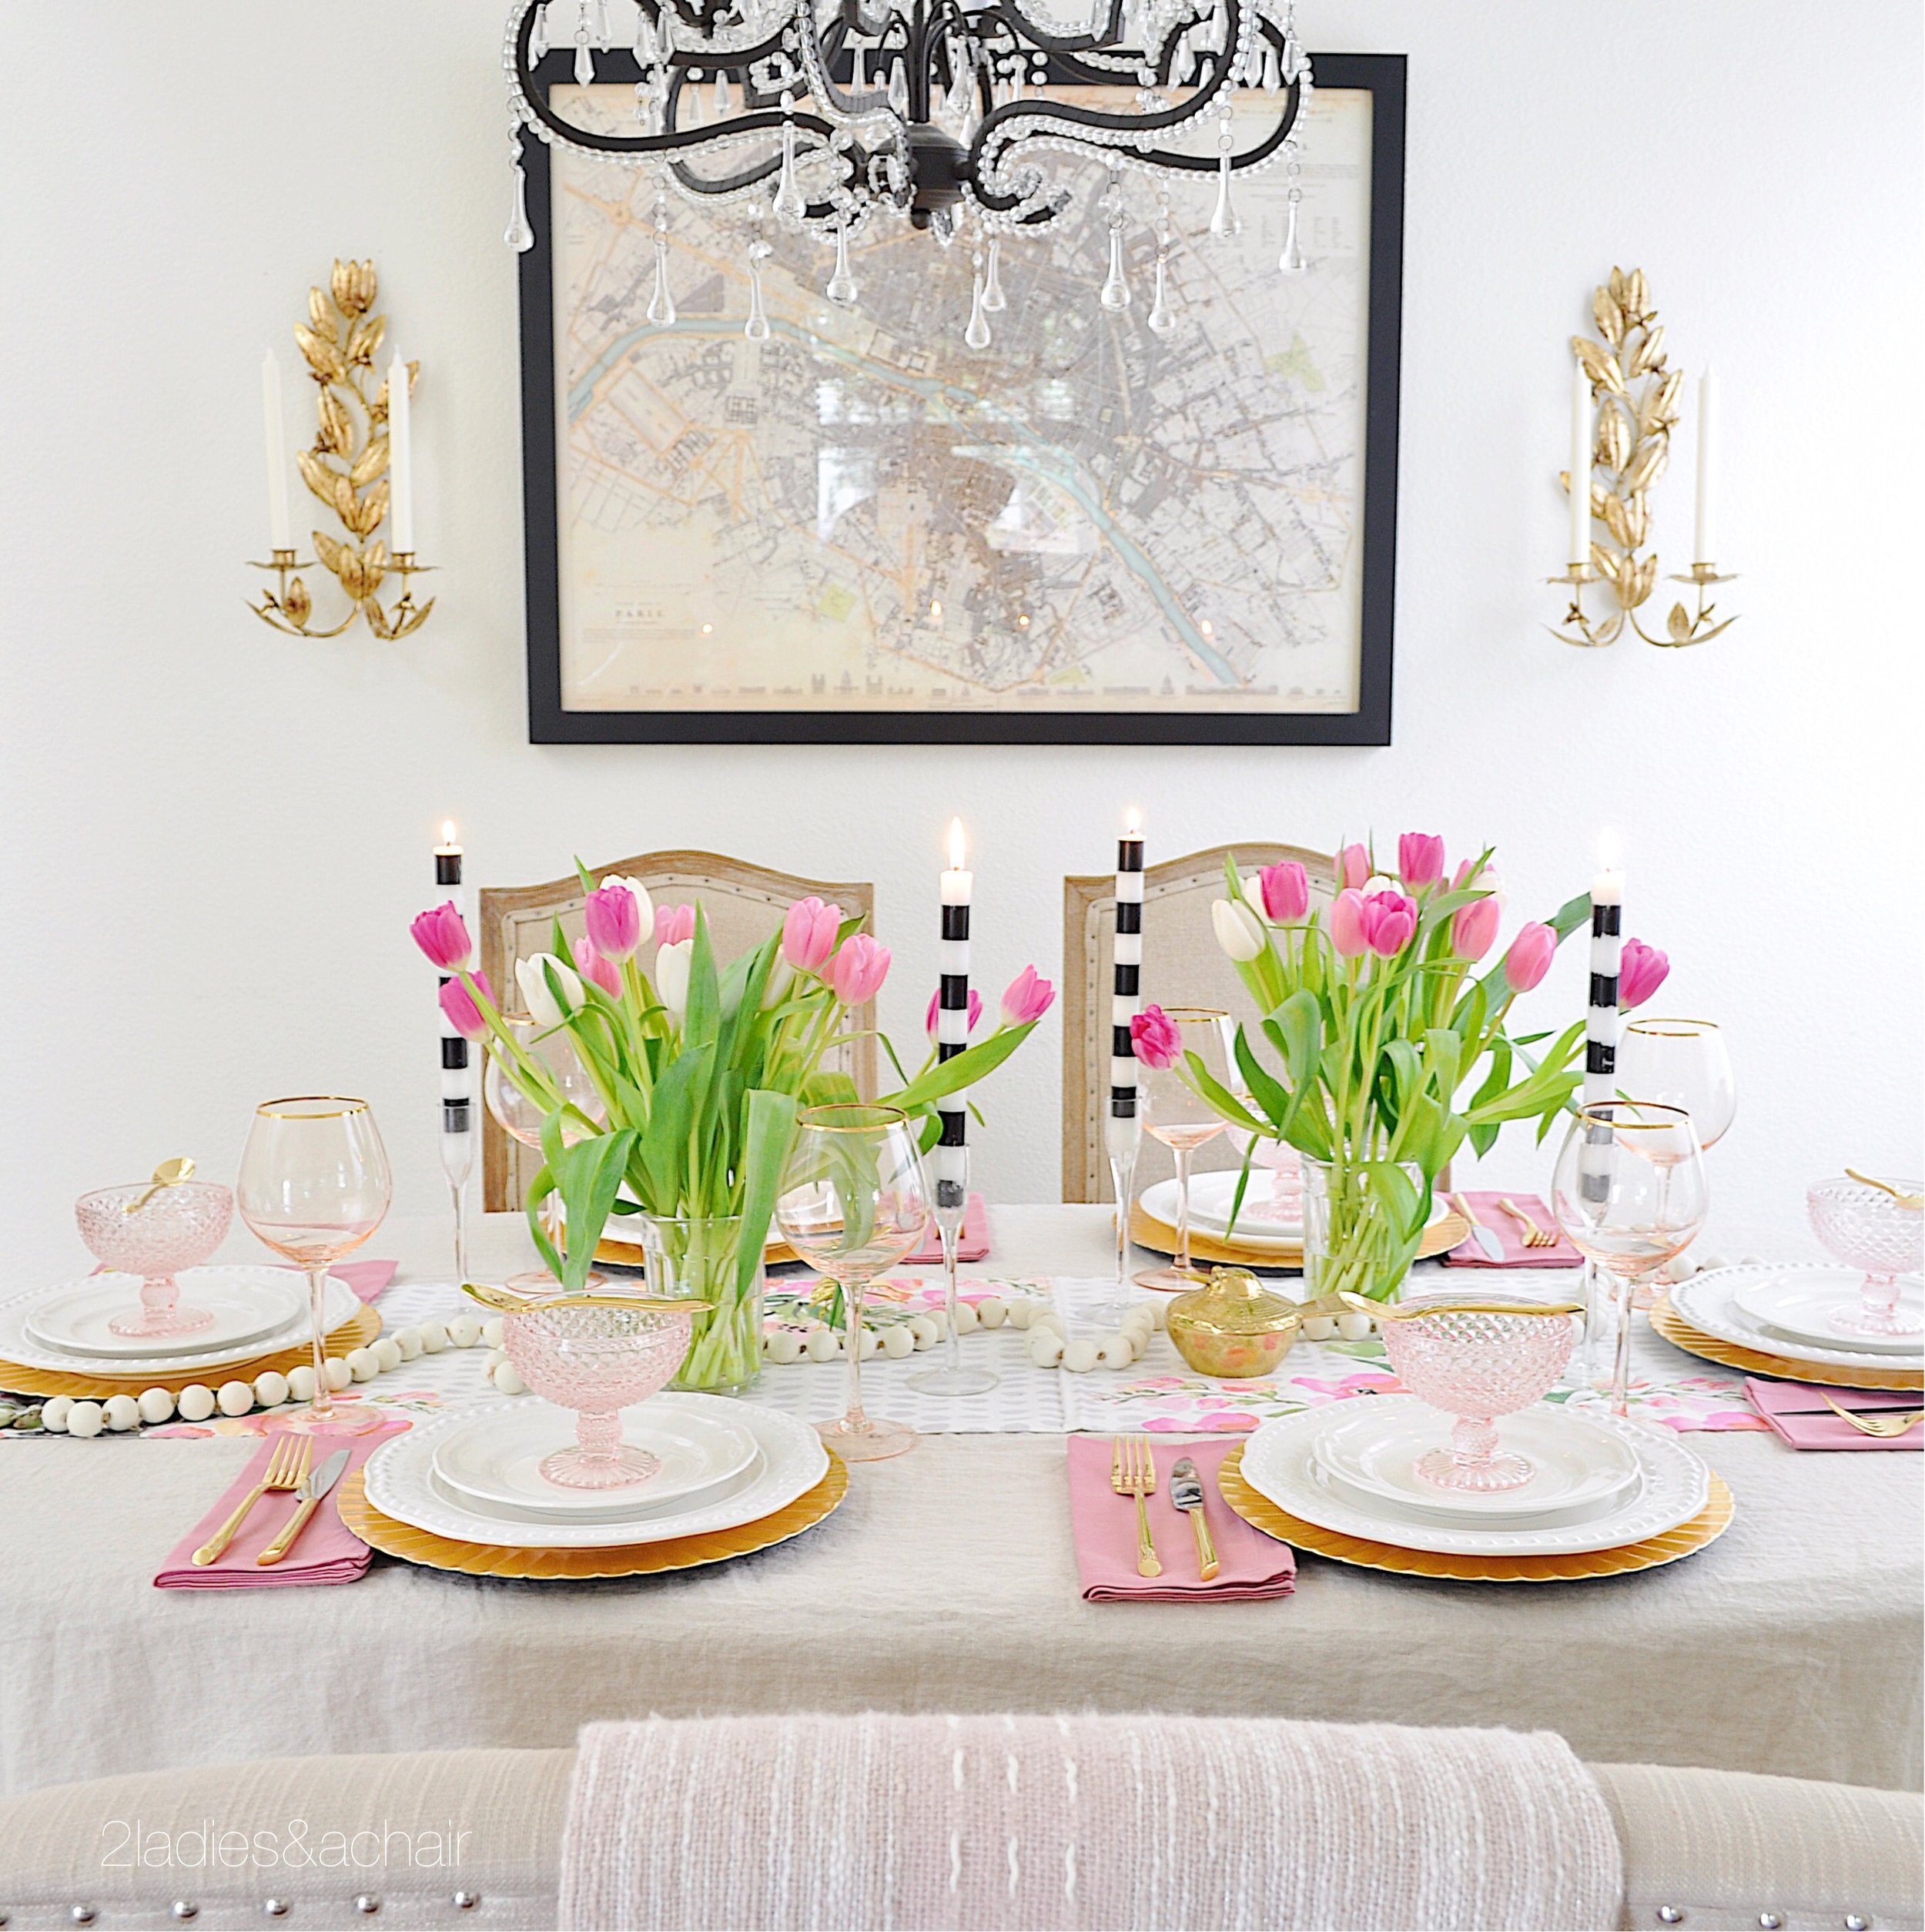 How to Create a Beautiful Spring Brunch Tablescape - The Do's & Don'ts